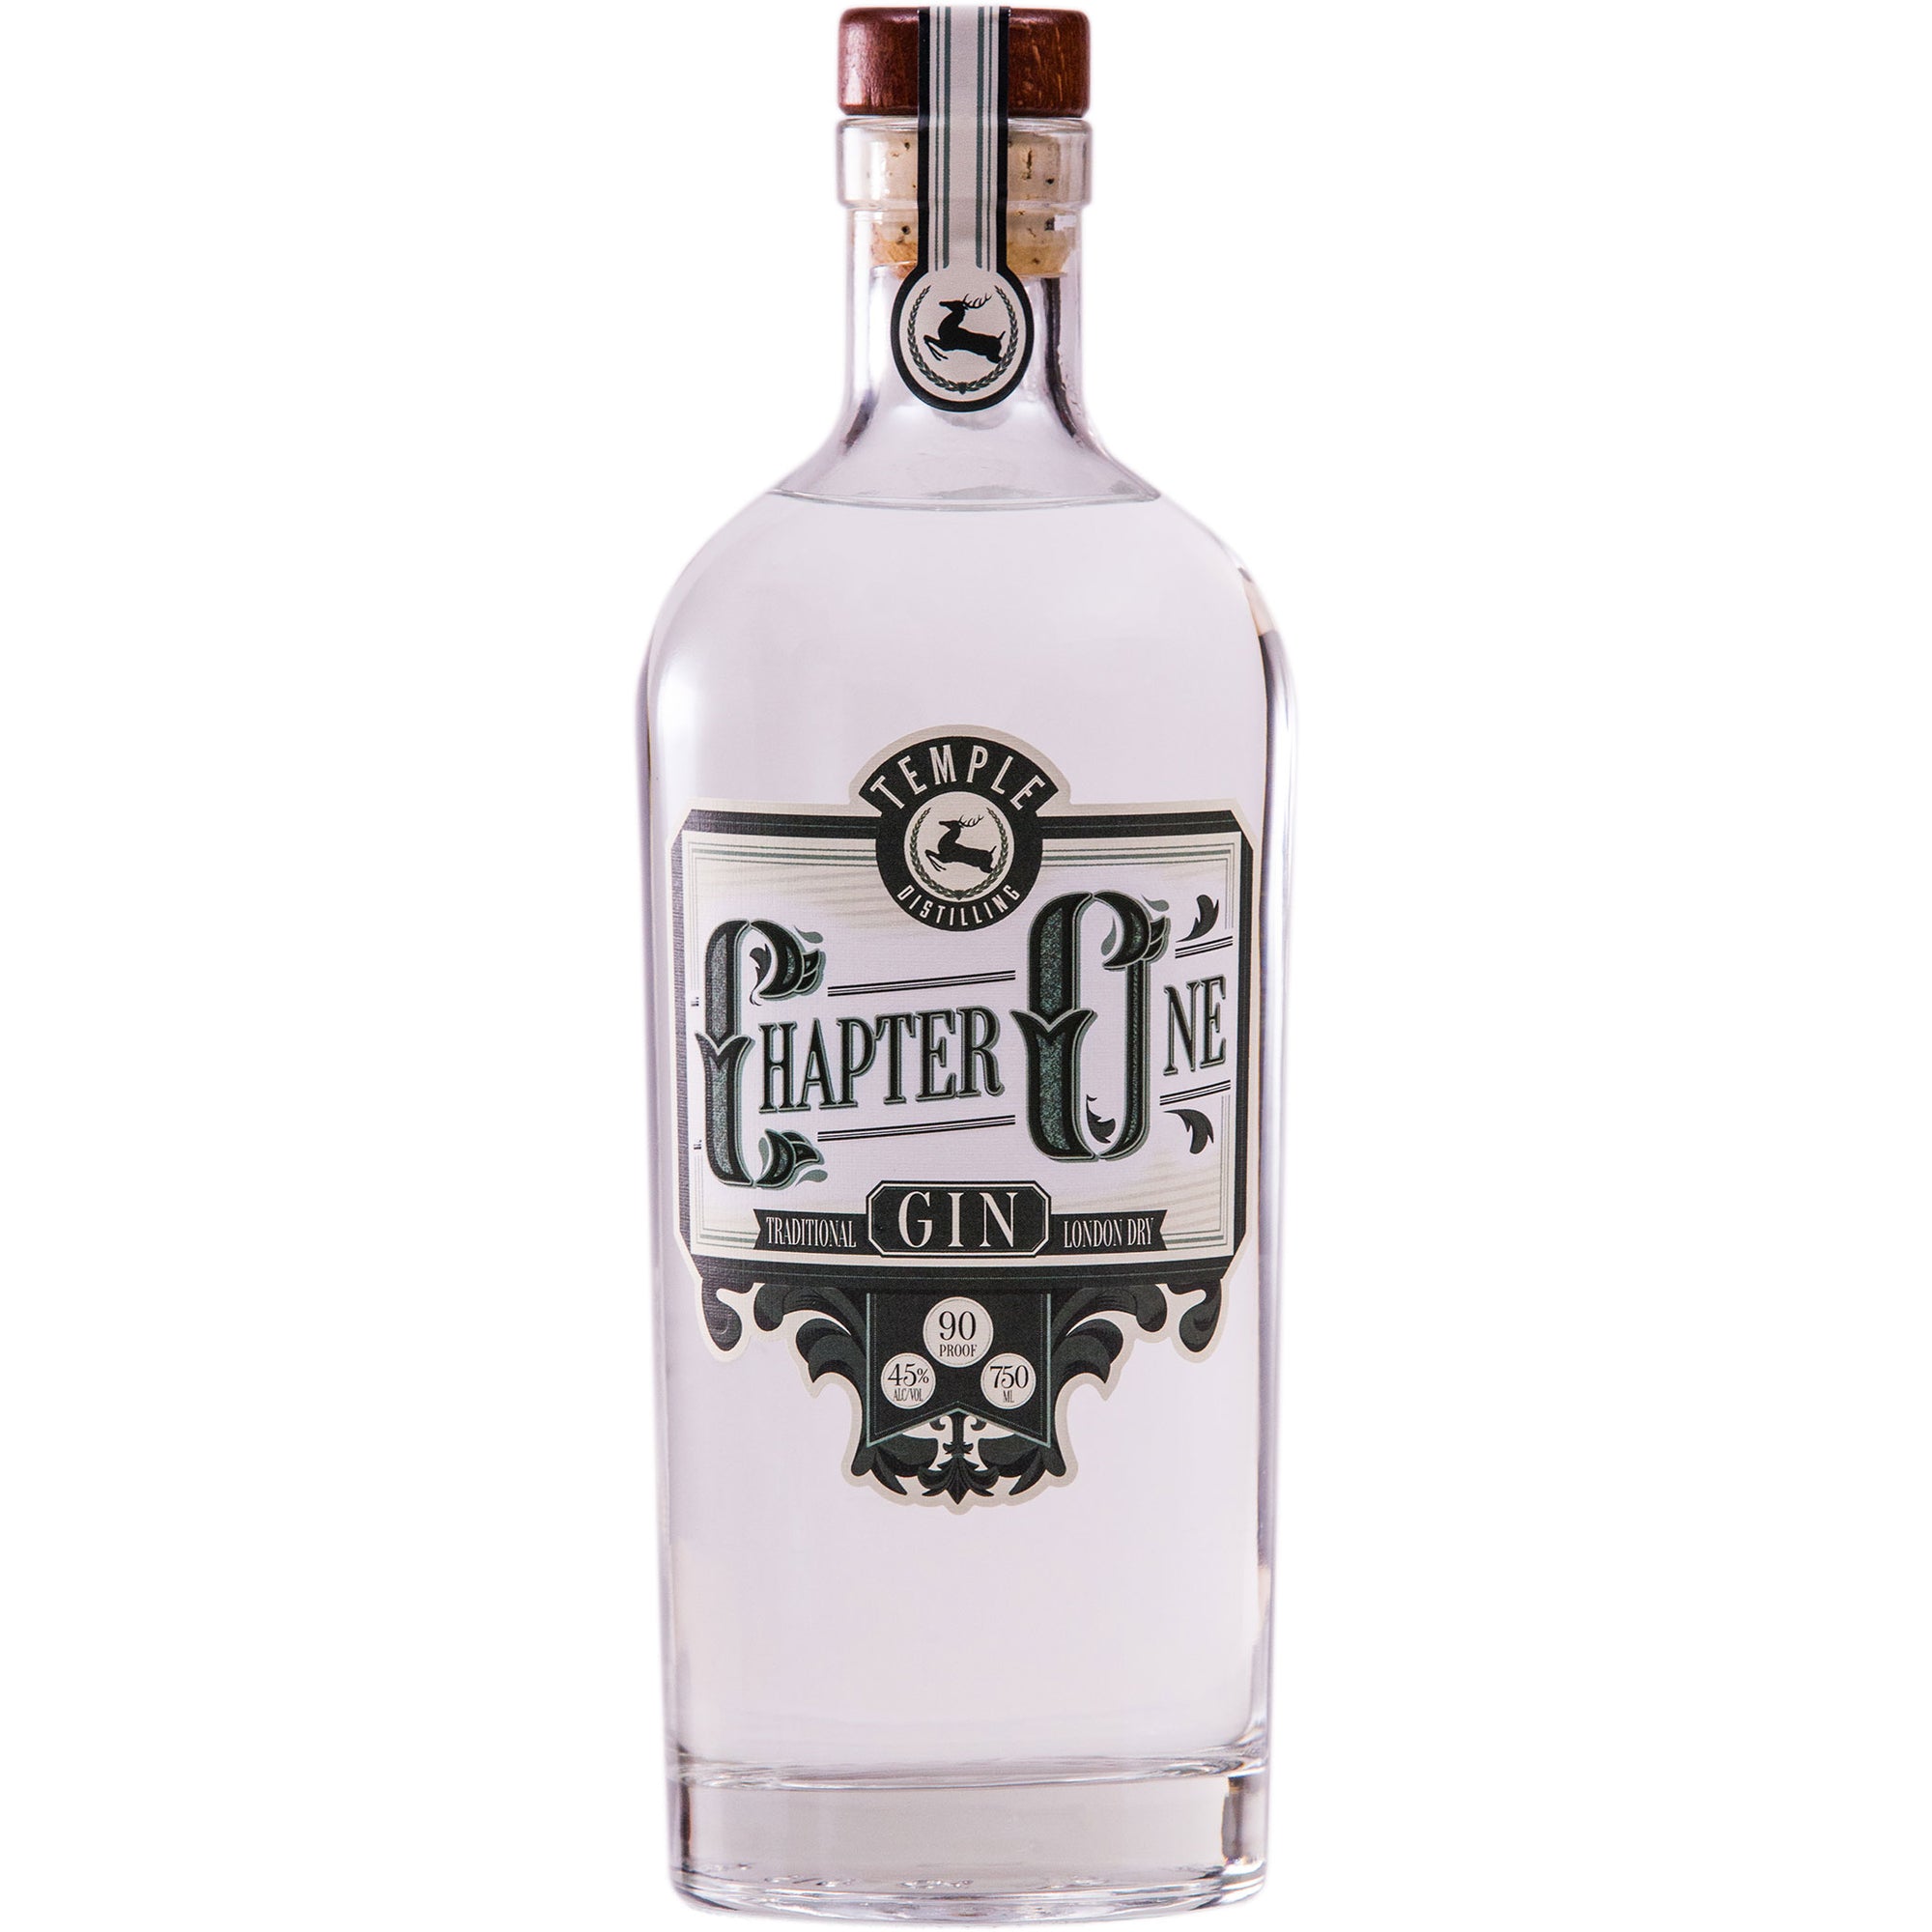 Chapter One London Dry Gin